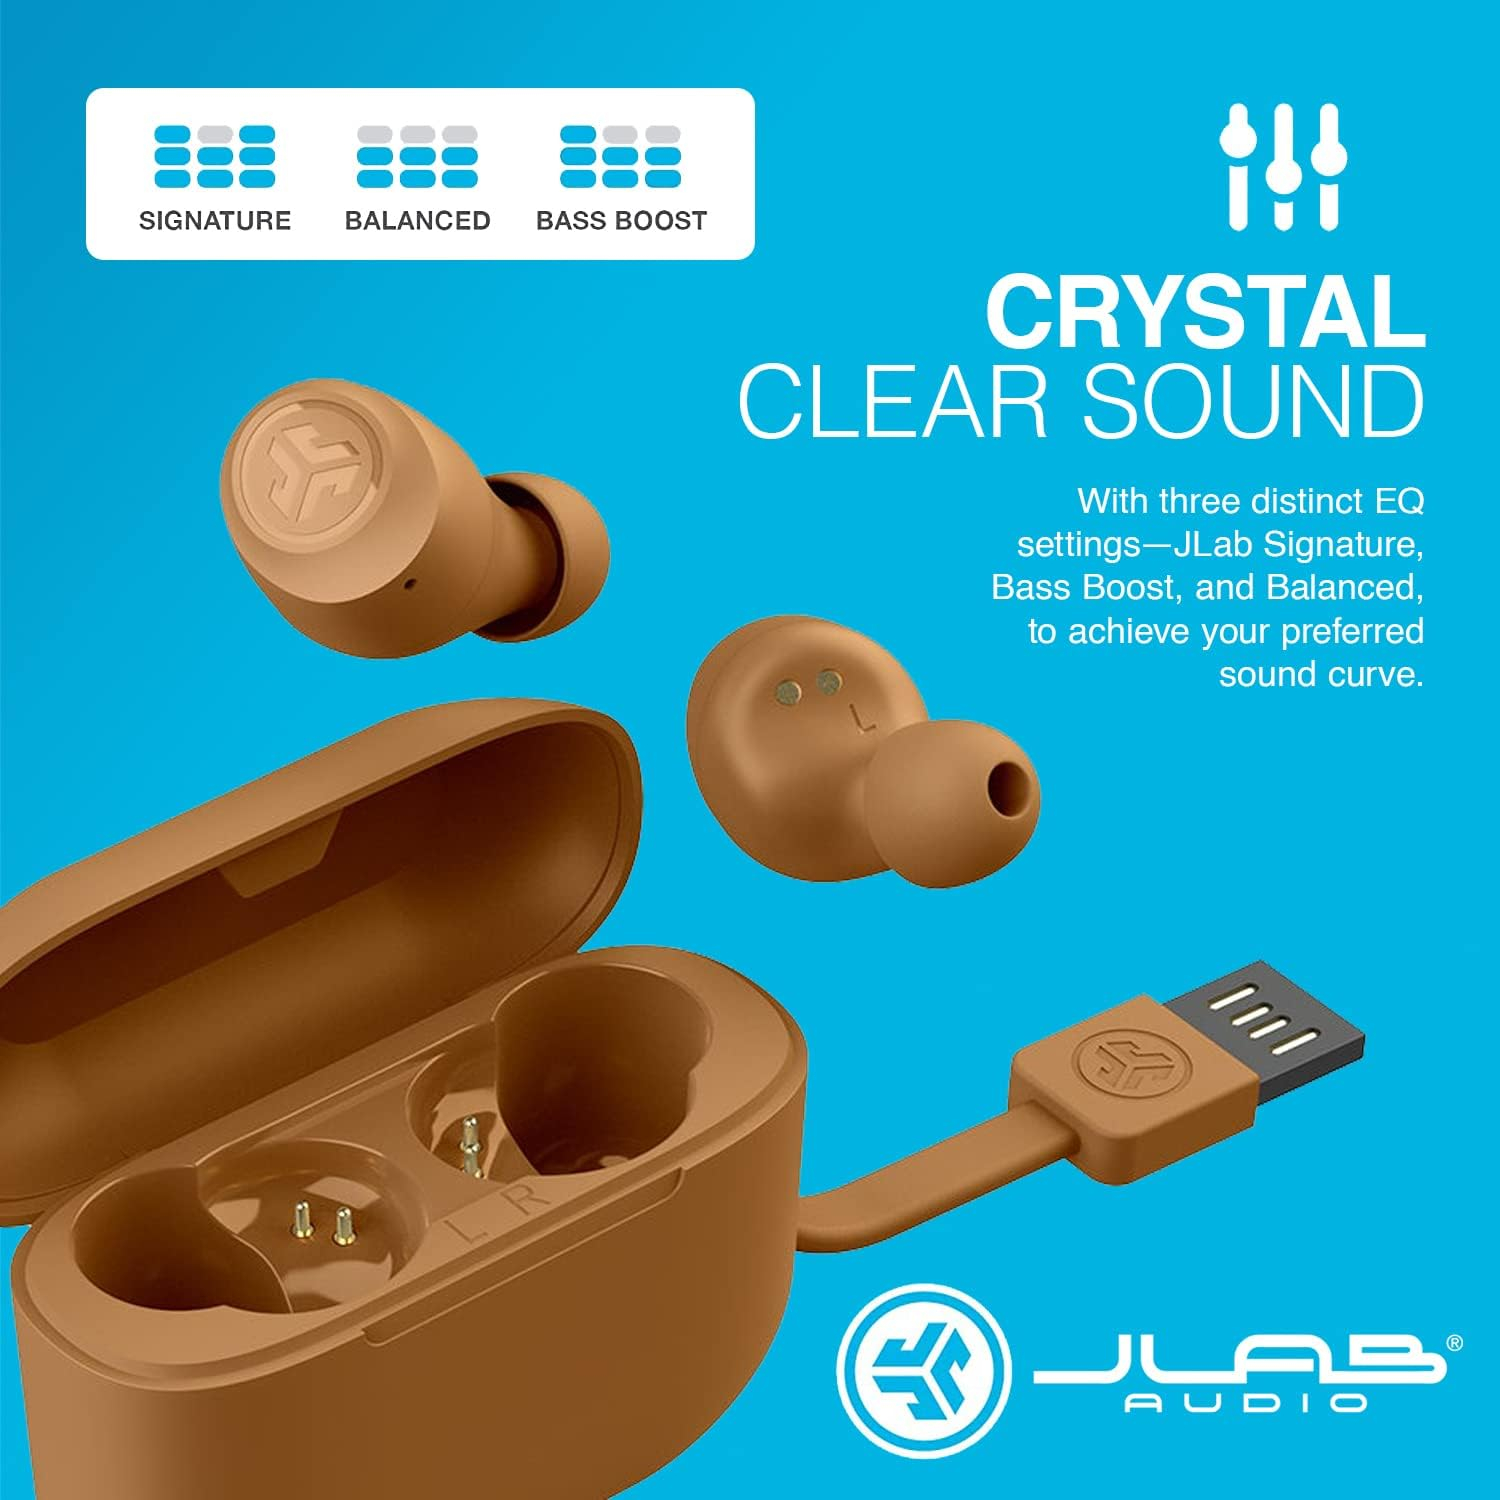 JLab Go Air Pop True Wireless Bluetooth Earbuds + Charging Case, Limited Edition Violet, Dual Connect, IPX4 Sweat Resistance, Bluetooth 5.1 Connection, 3 EQ Settings Signature, Balanced, Bass Boost